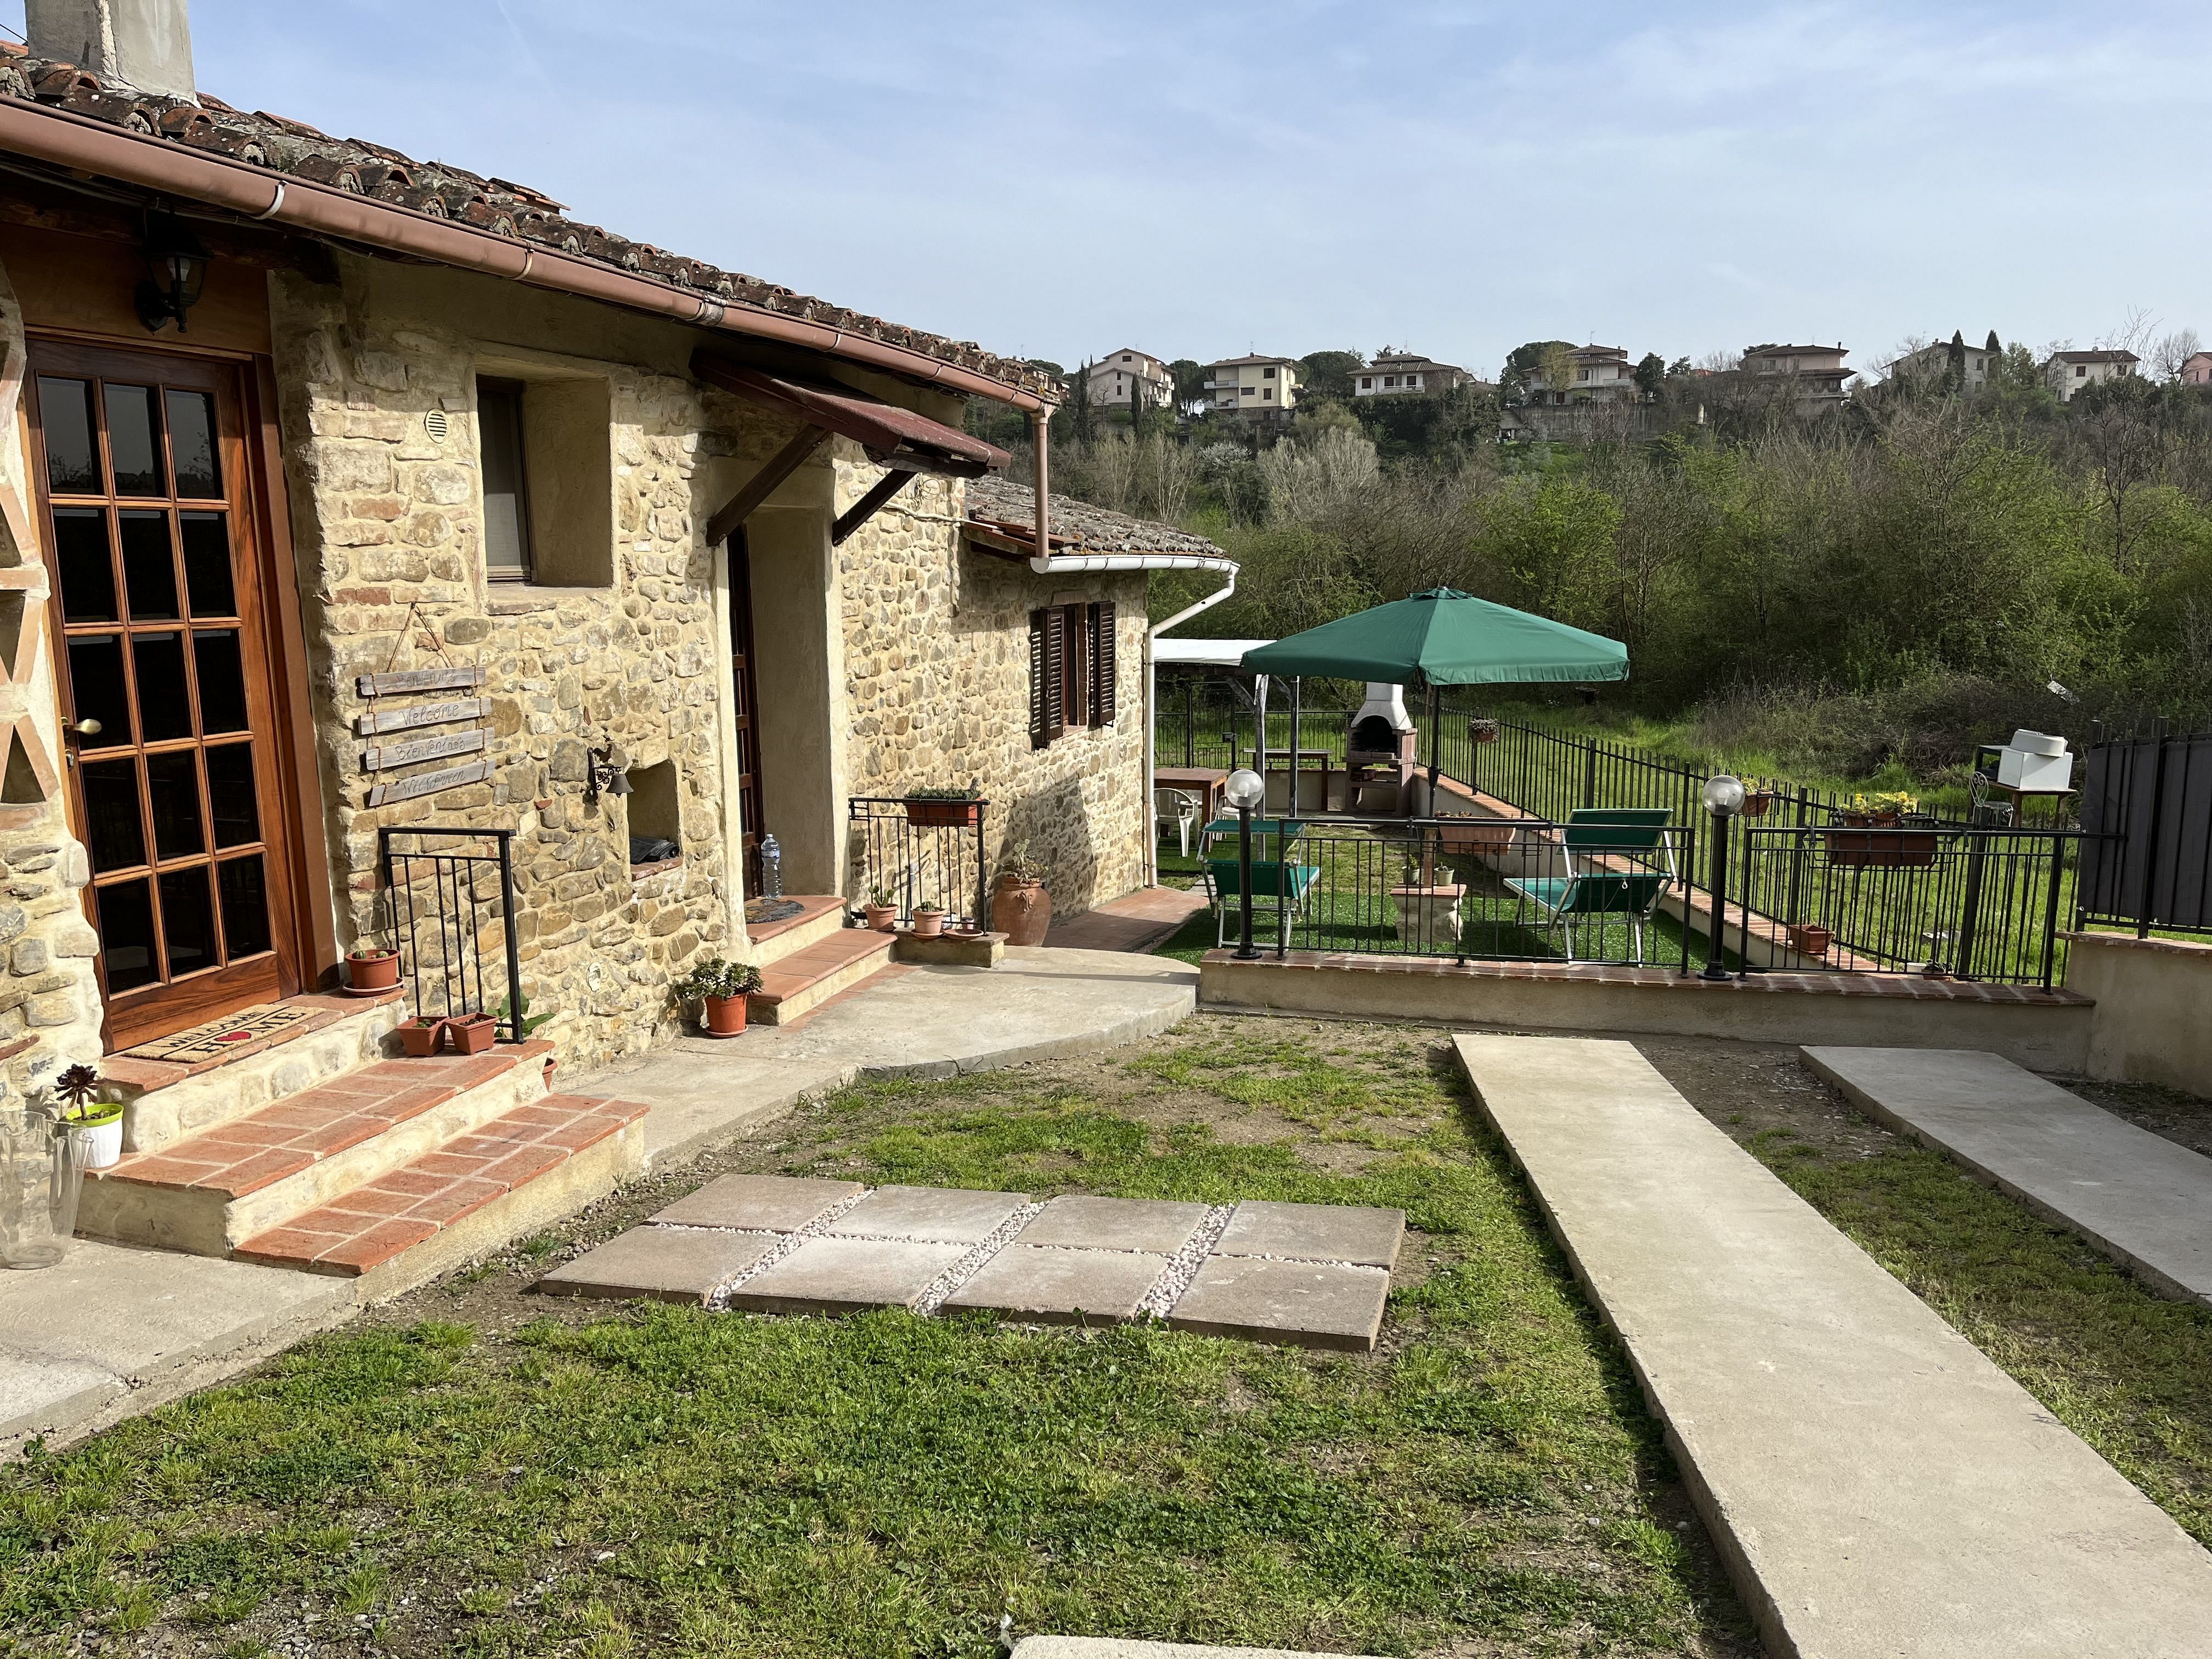 JWguest House at Zona Industriale, Toscana | Charming stone house in typical Tuscan style | Jwbnb no brobnb 1